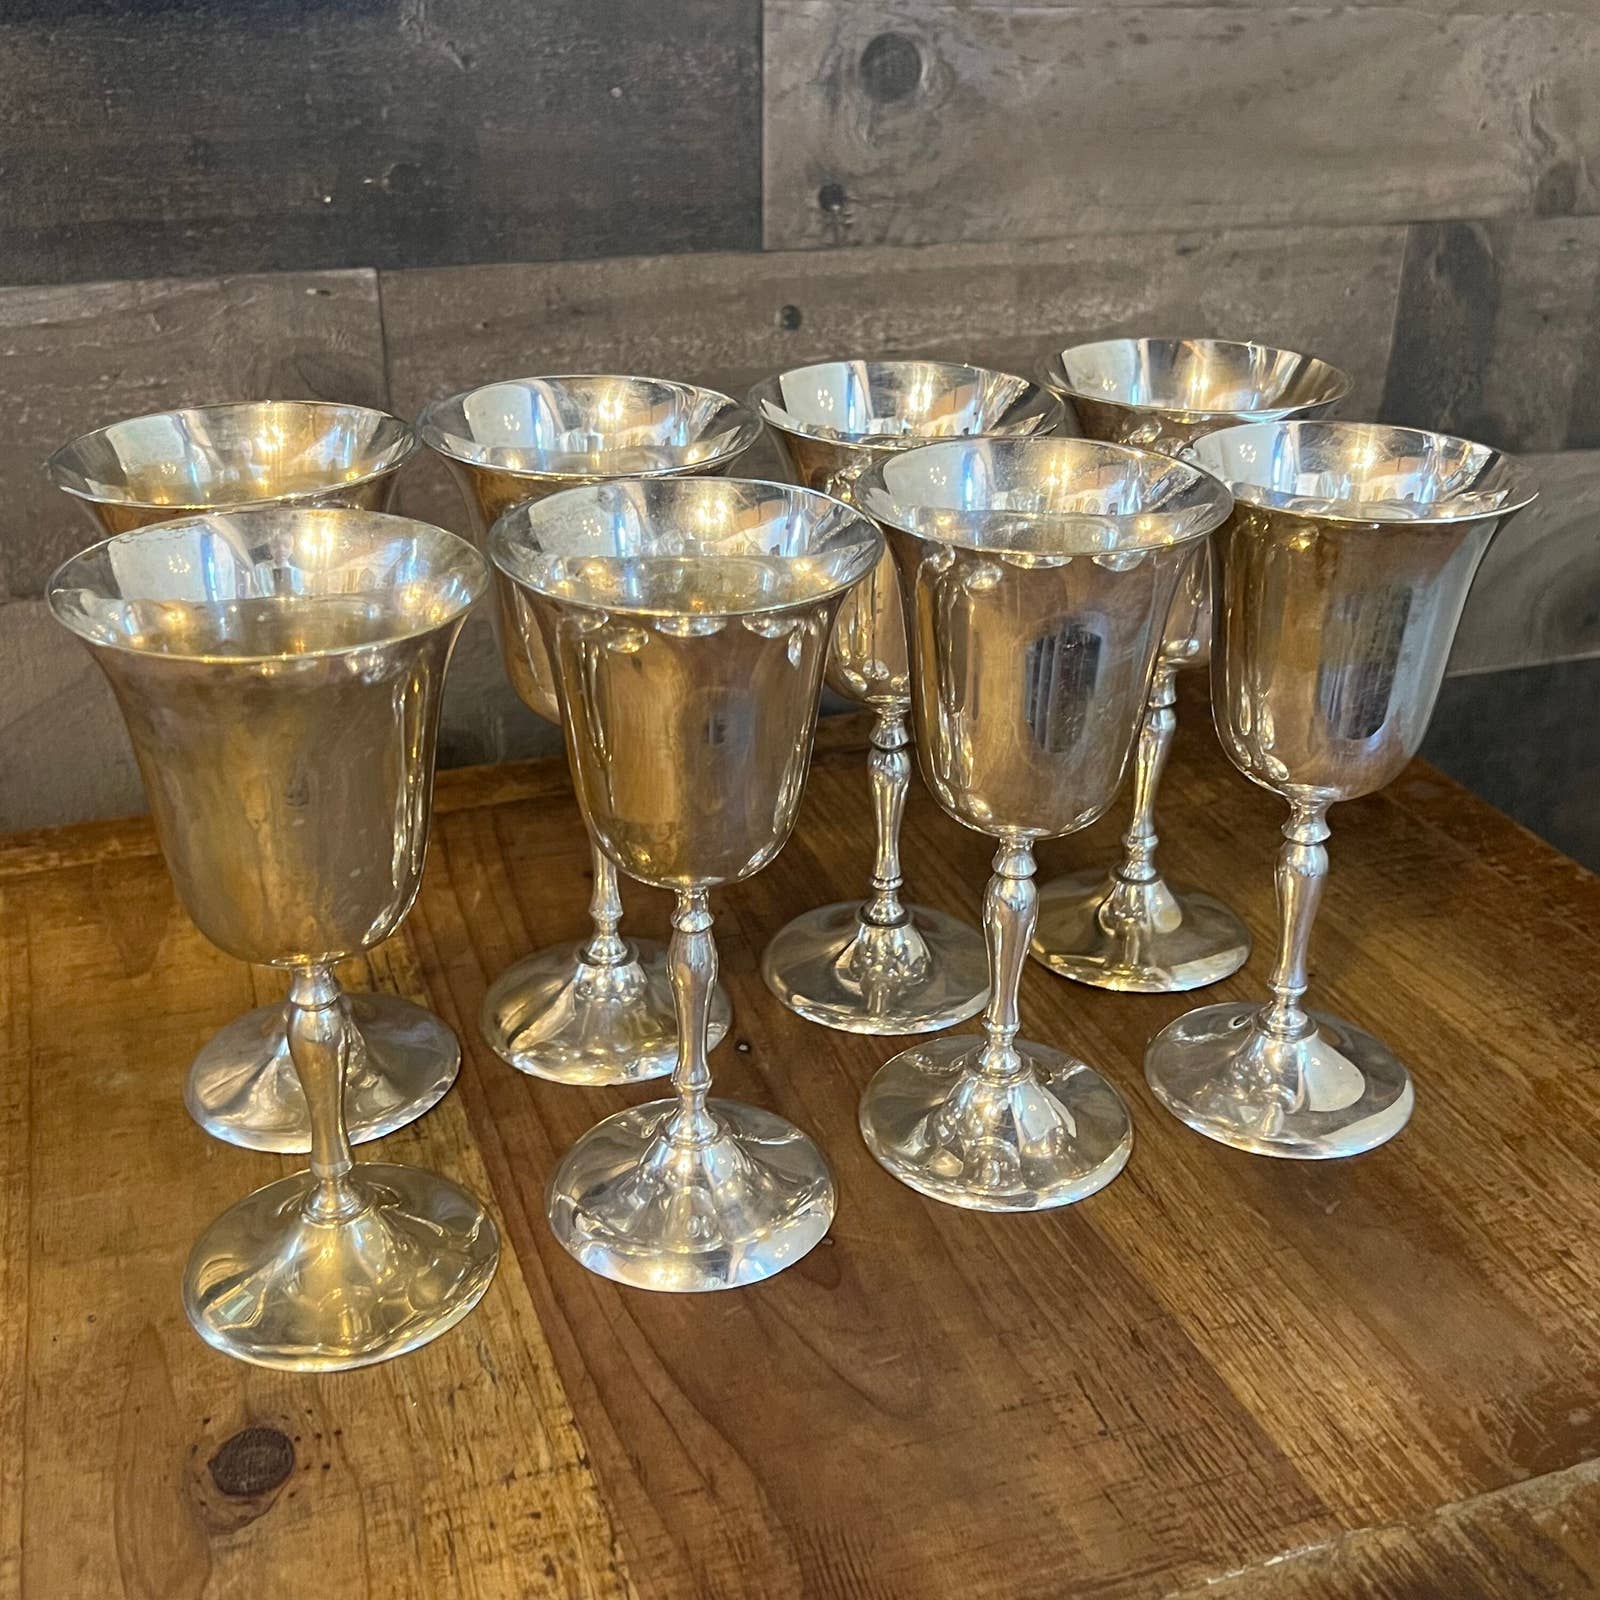 Vintage Set of 2 Solid Brass With Silver Plate Goblets Patina Wine Glasses  Cups 